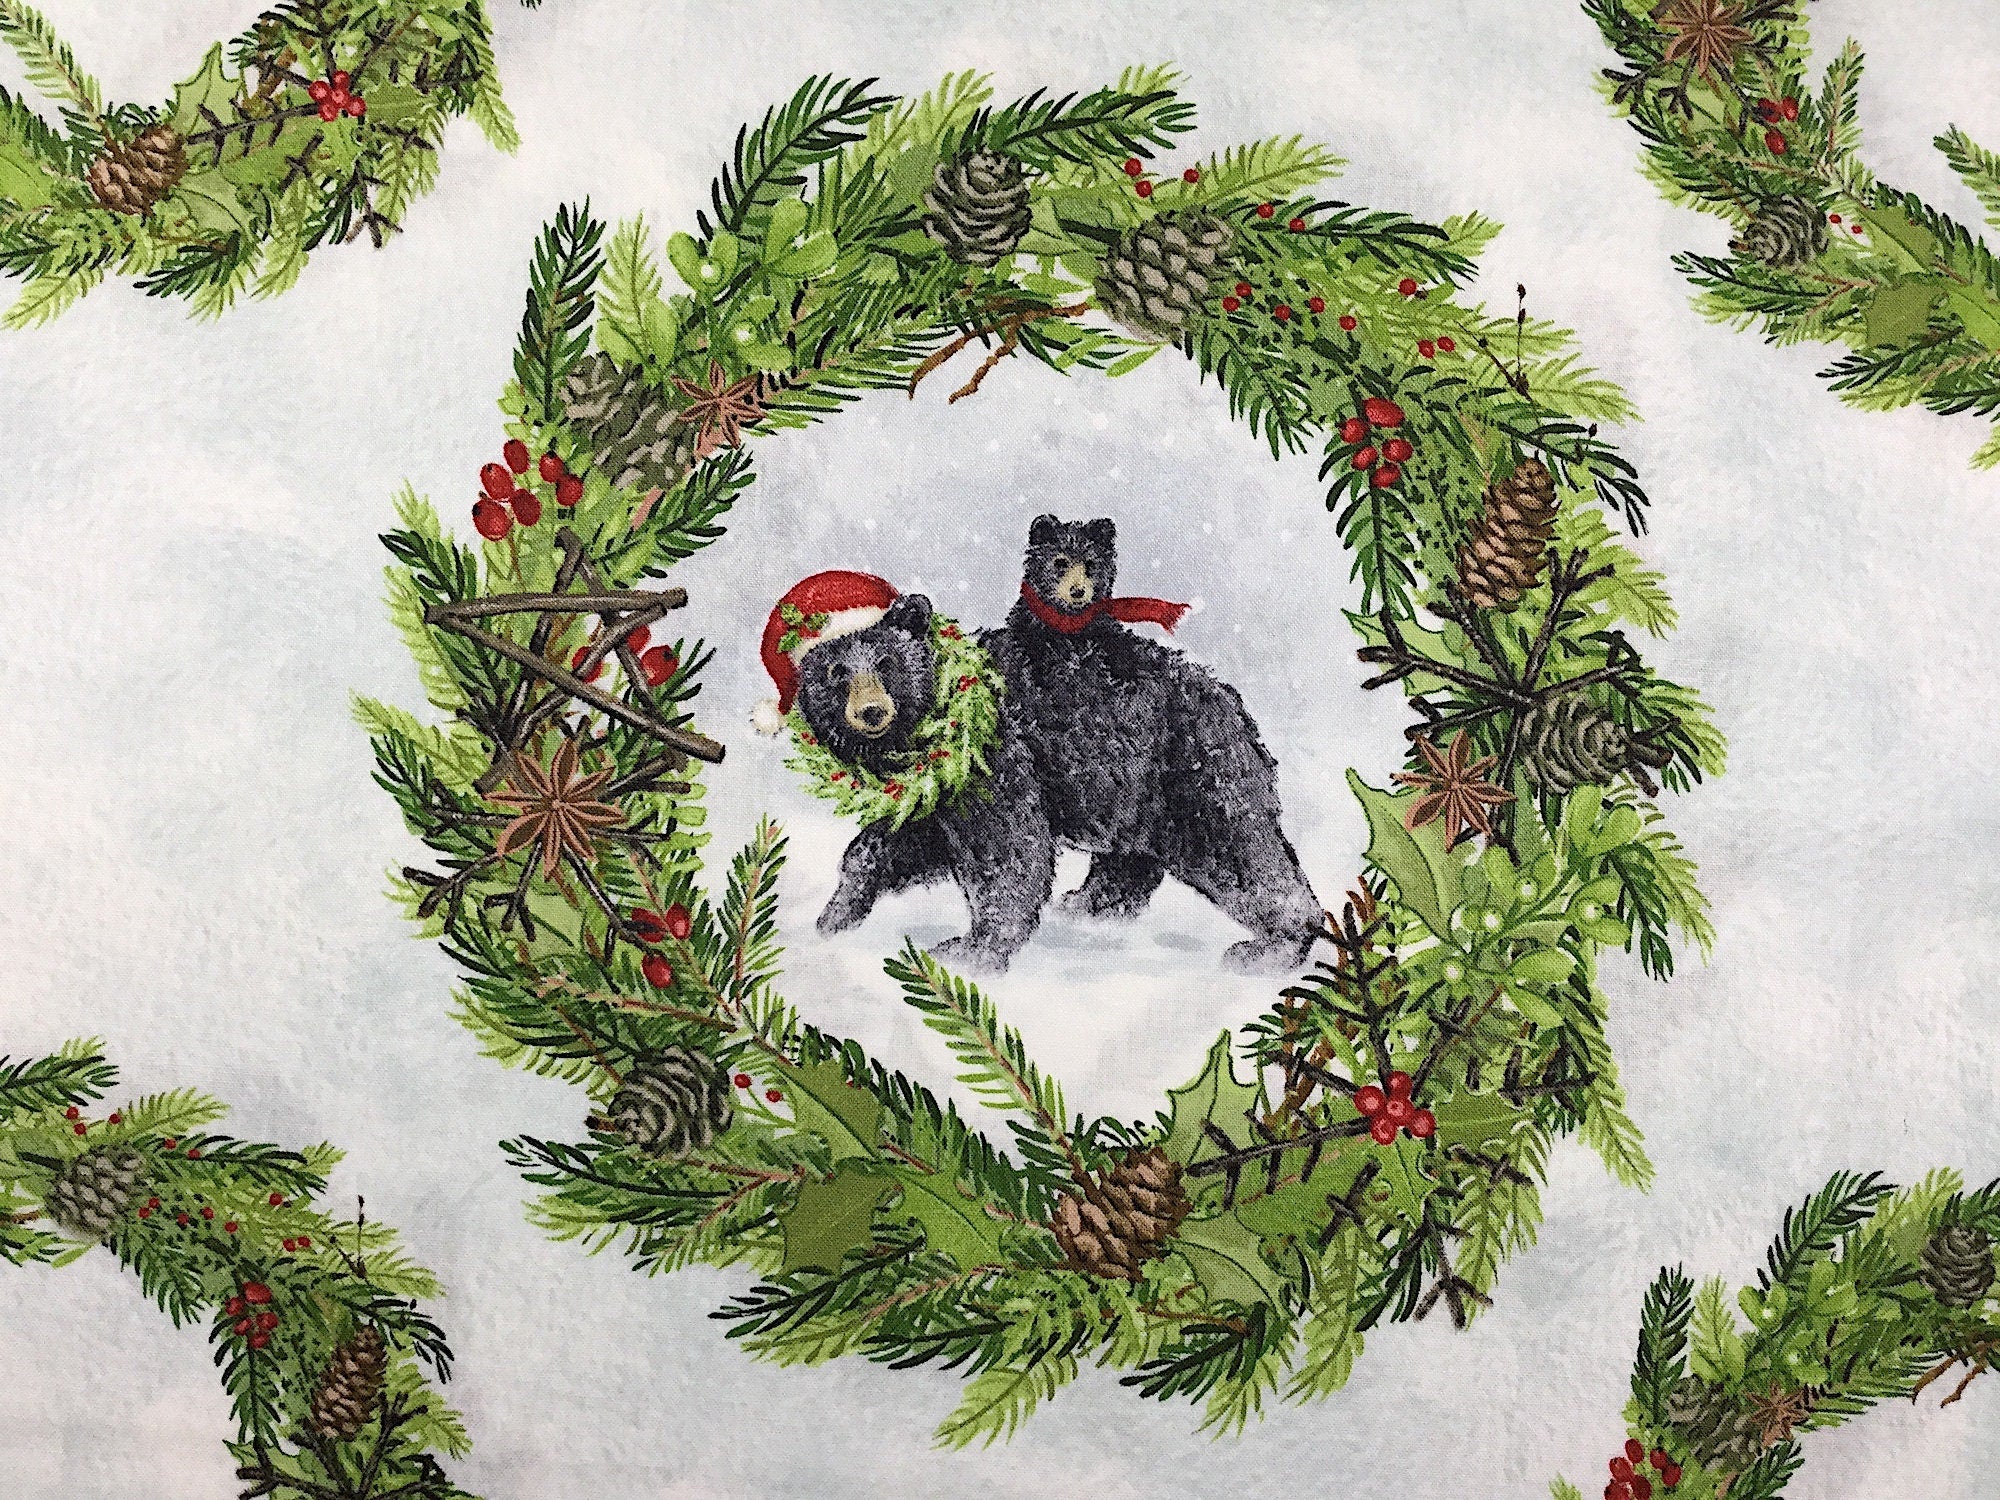 This fabric is covered with winter scenes of animals in wreath circles. There are fox, bears, snow bears, and deer within the decorated wreaths.